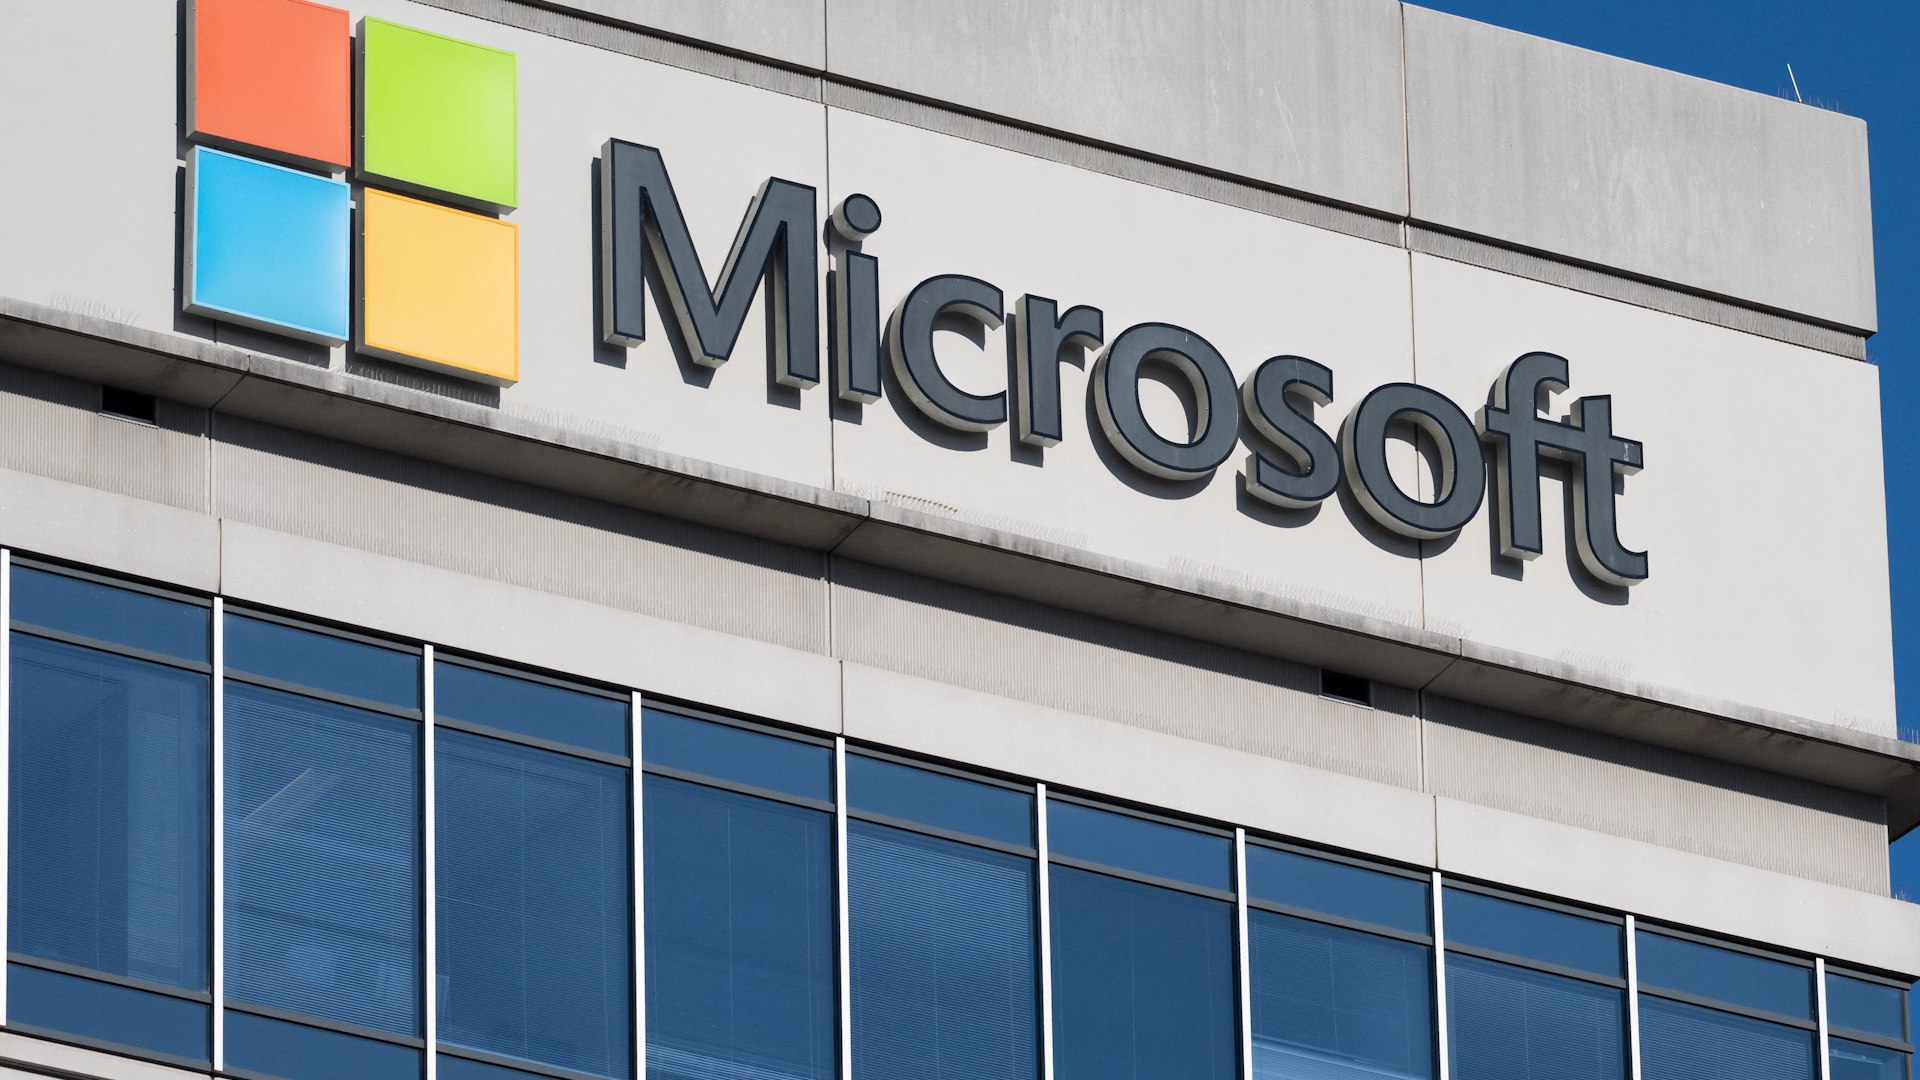 Microsoft 365 services back up after hours of outage